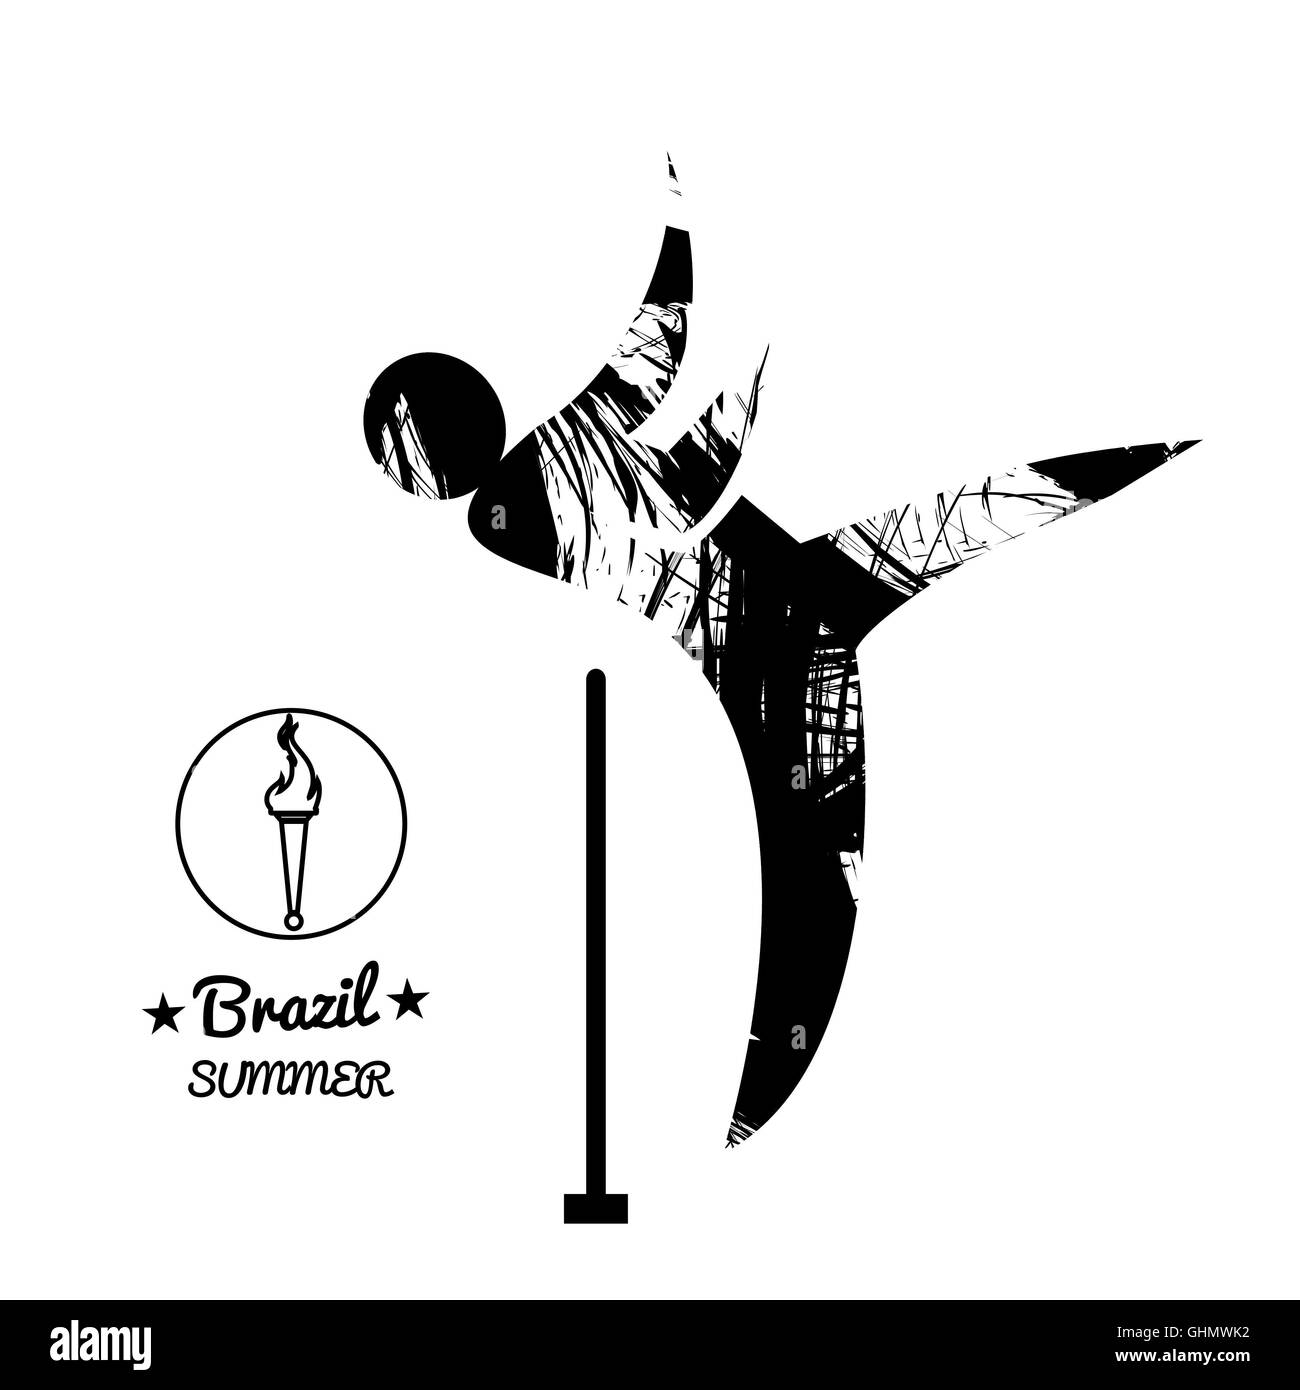 Brazil summer sport card with an abstract hammer thrower, in black outlines. Digital vector image Stock Photo